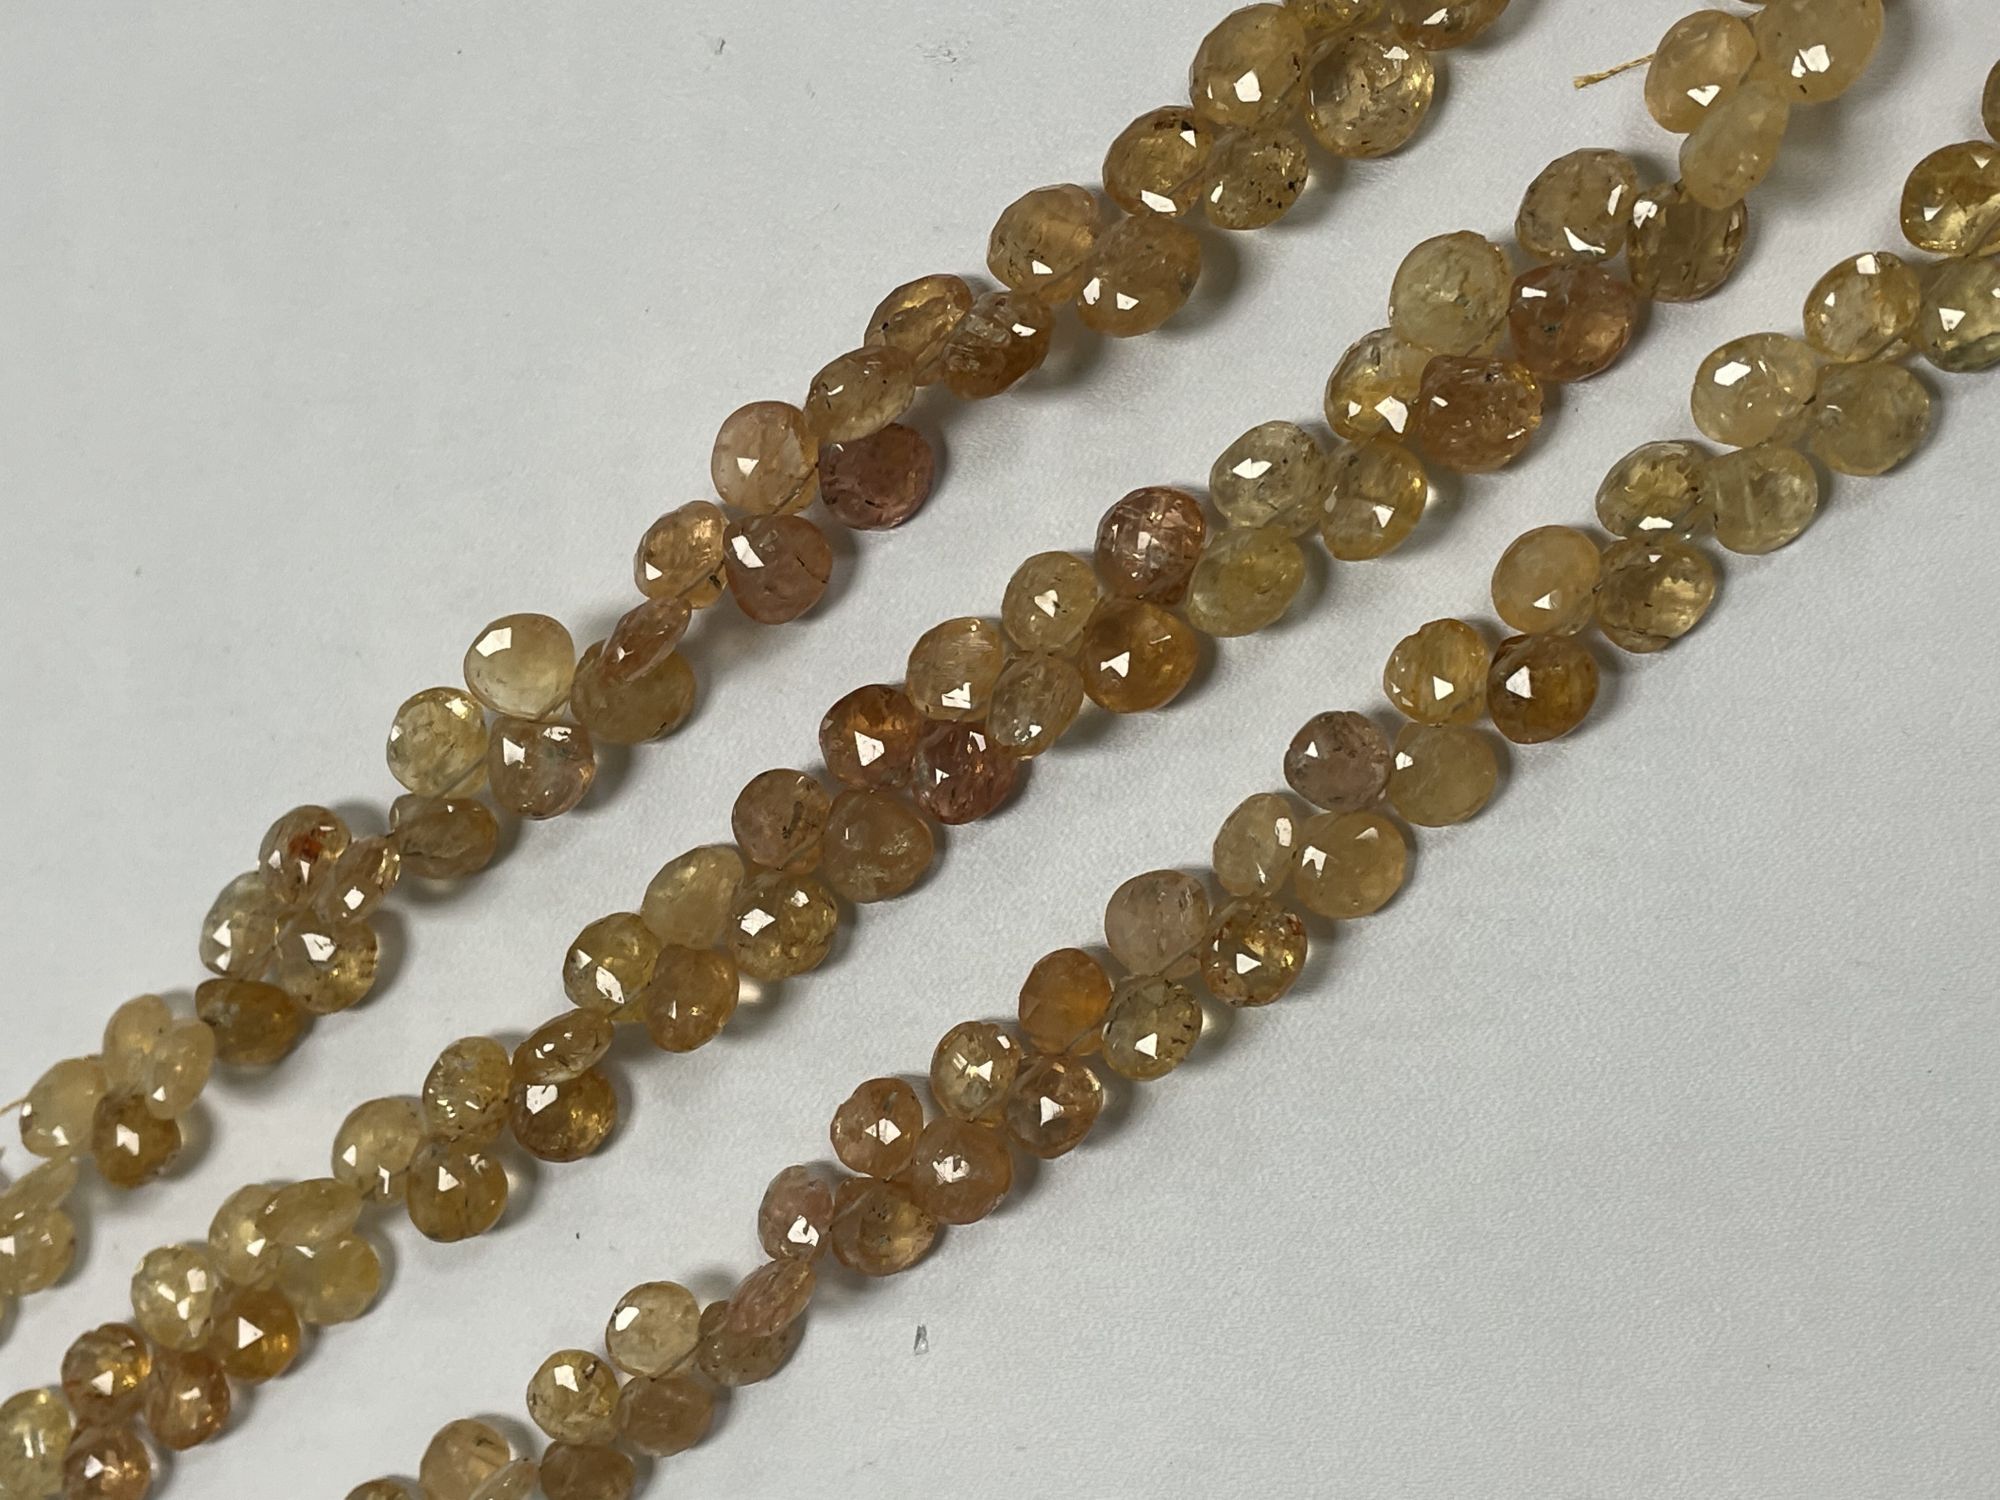 Imperial Topaz Heart Faceted